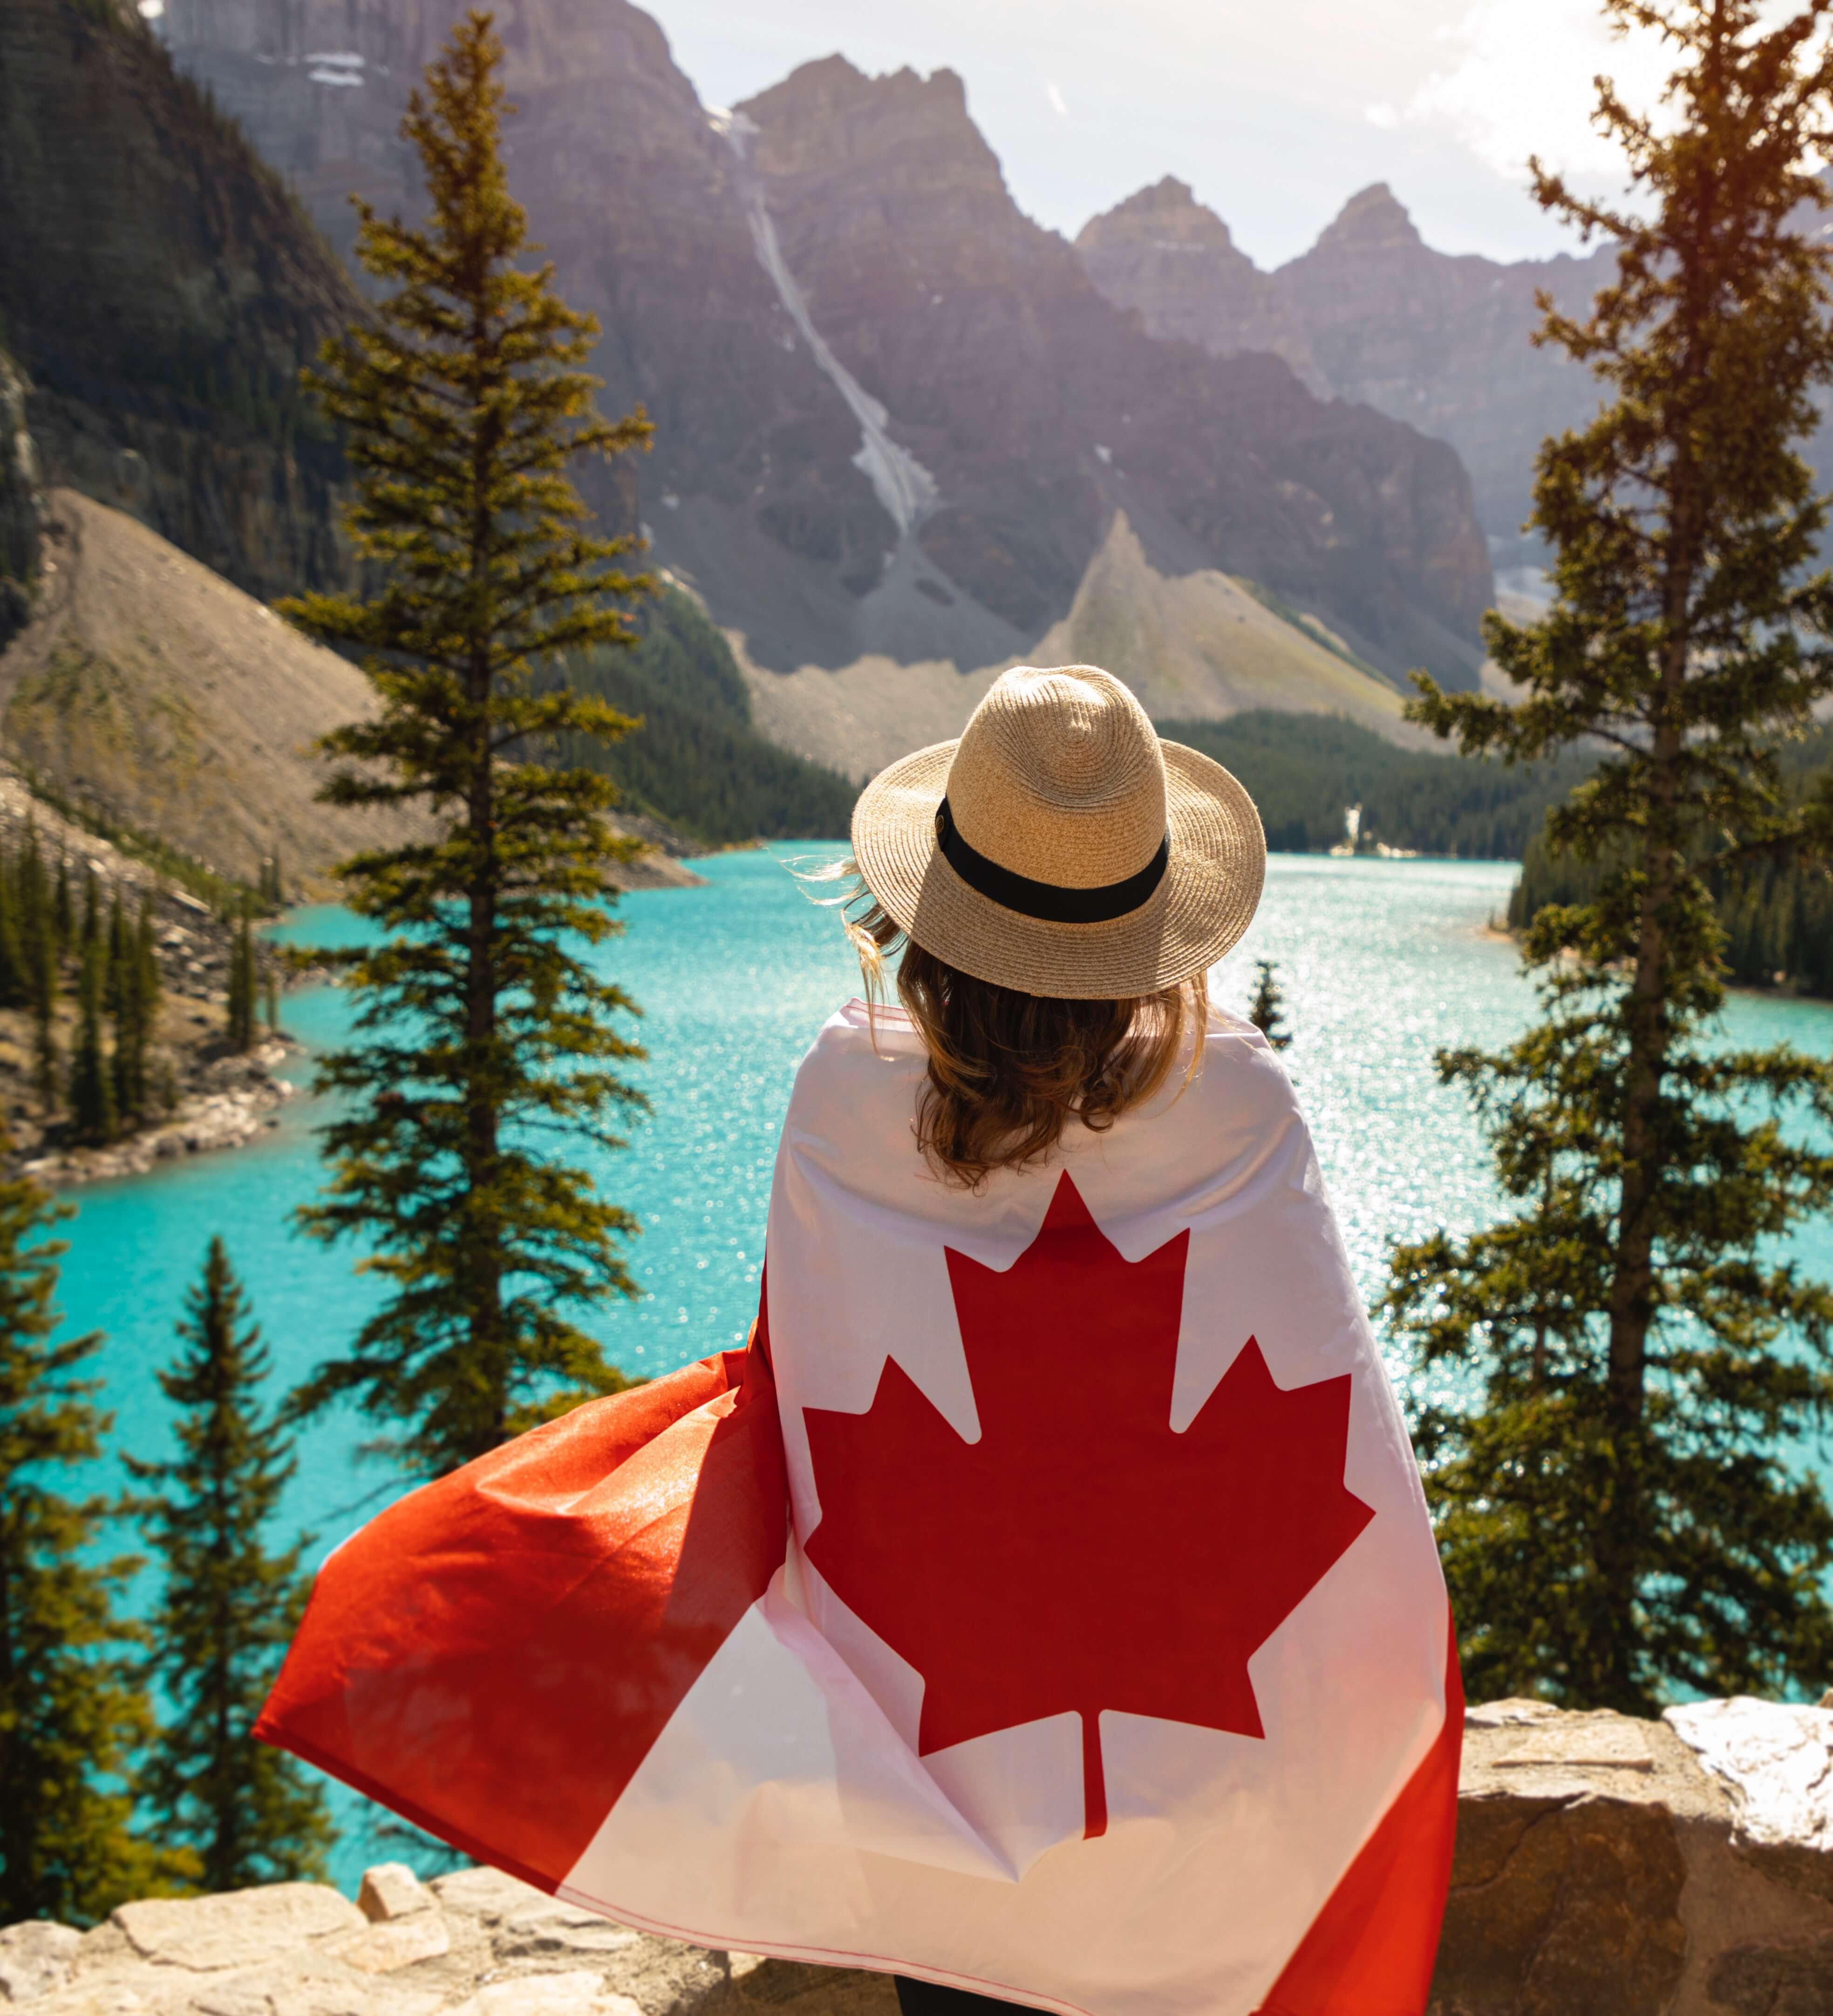 essay on why canada is the best place to live